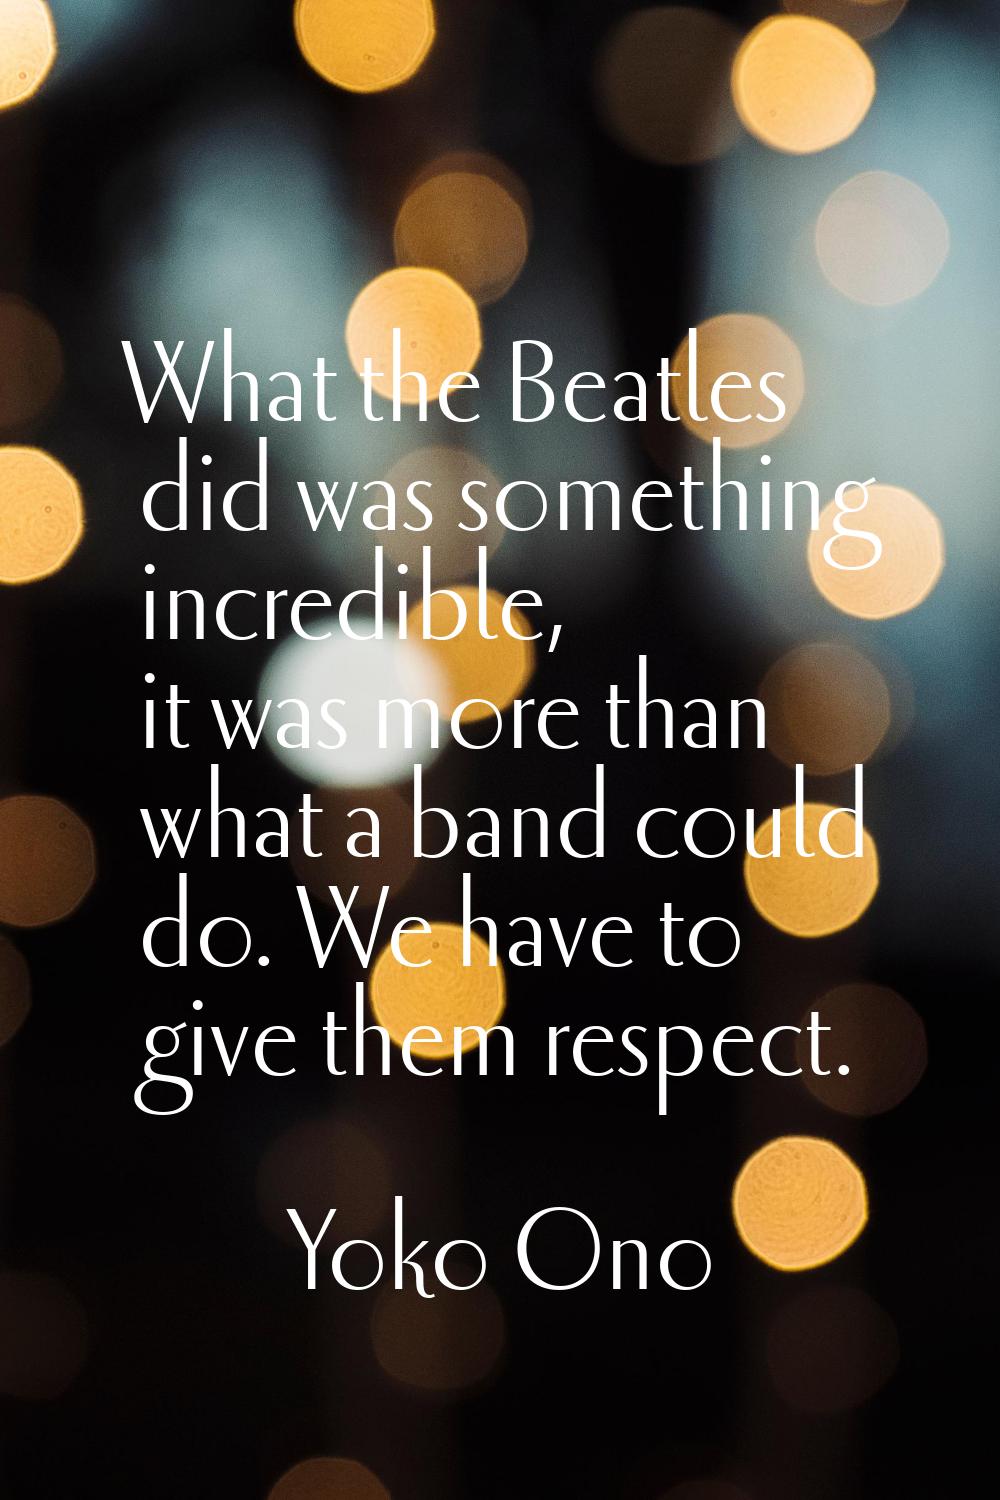 What the Beatles did was something incredible, it was more than what a band could do. We have to gi